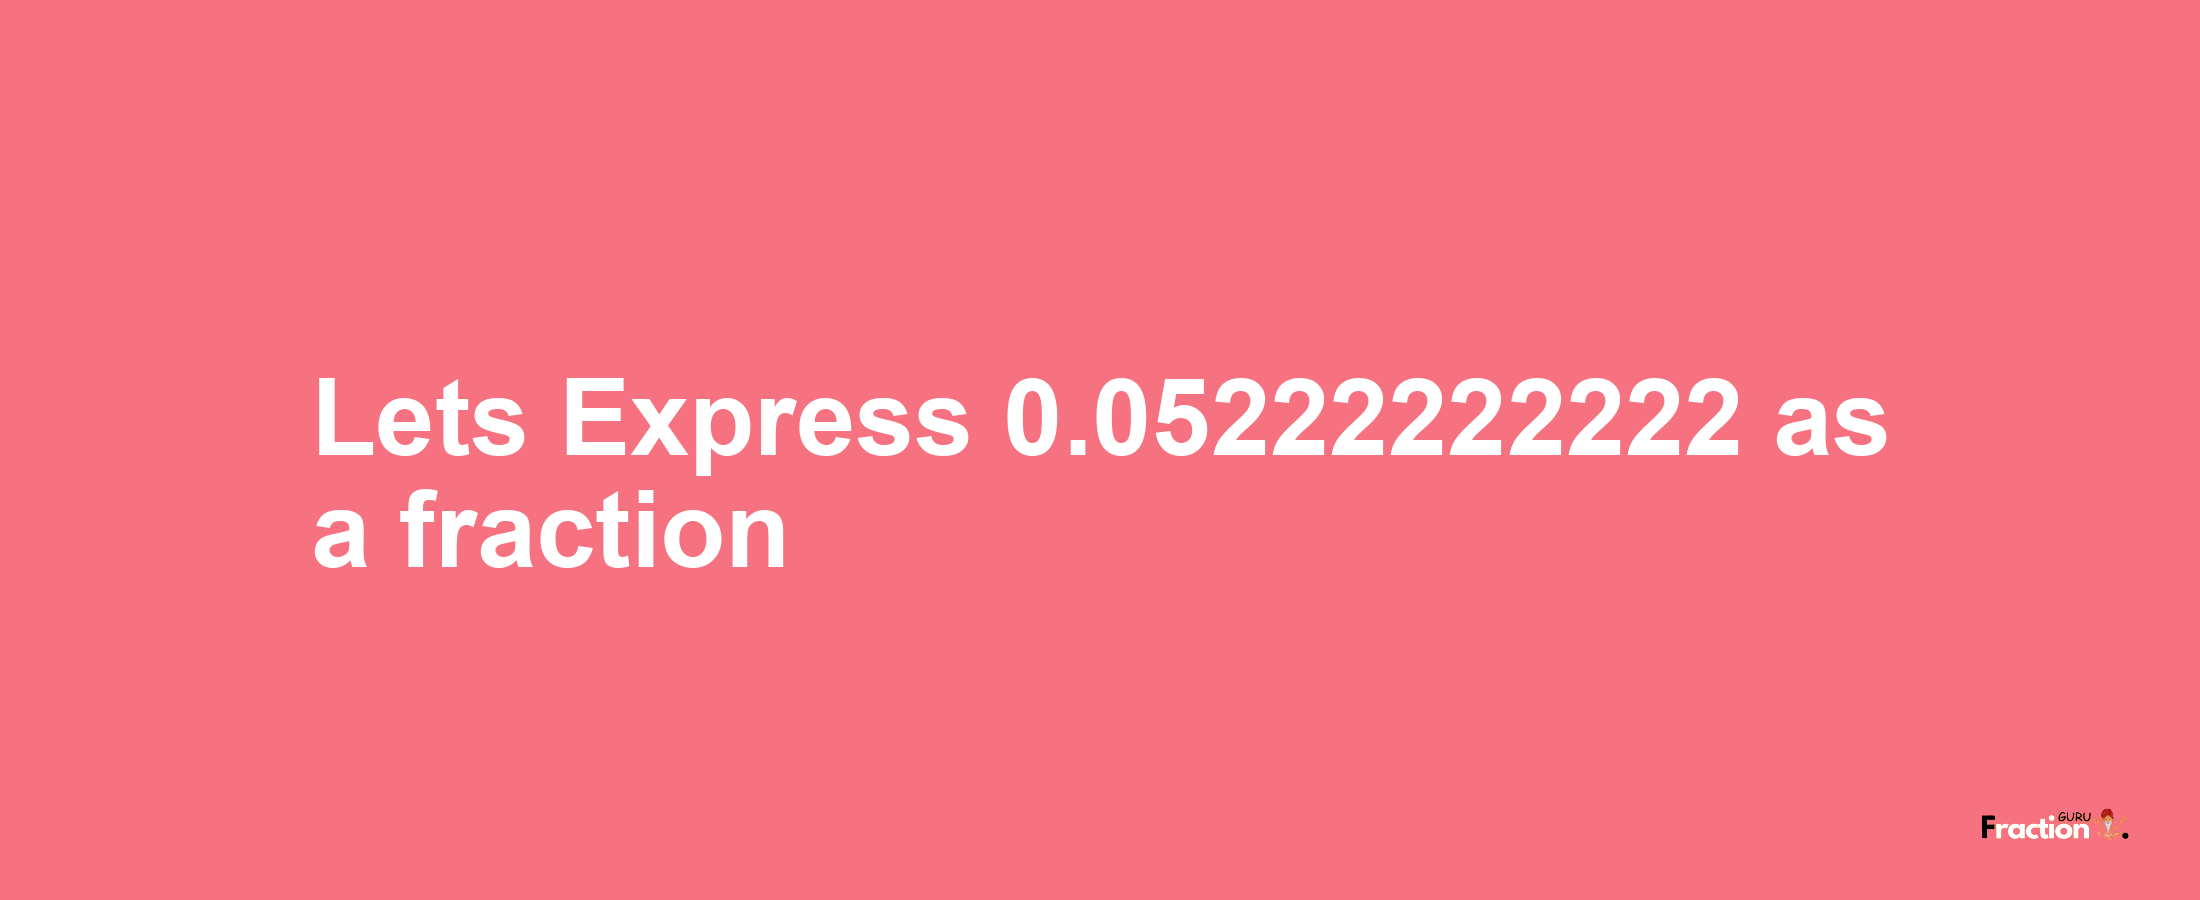 Lets Express 0.05222222222 as afraction